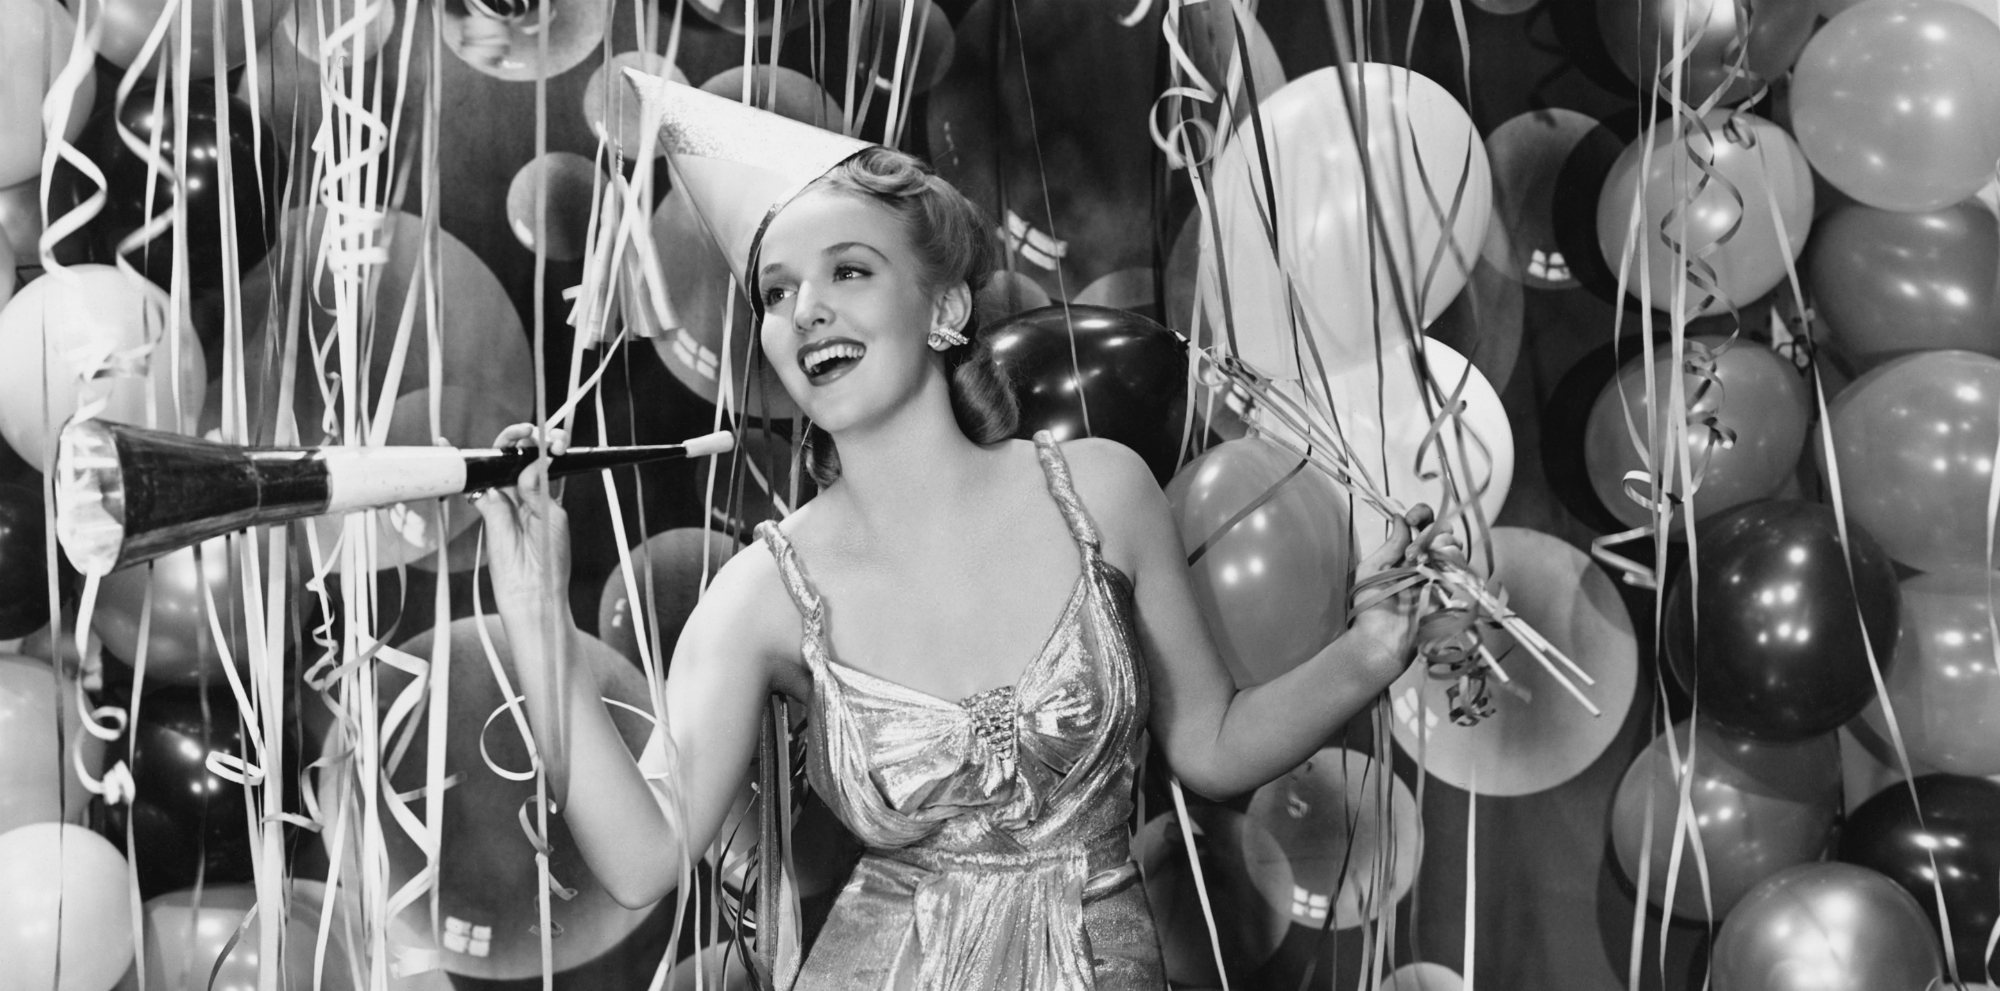 Retro image of girl having a party, with balloons in the background